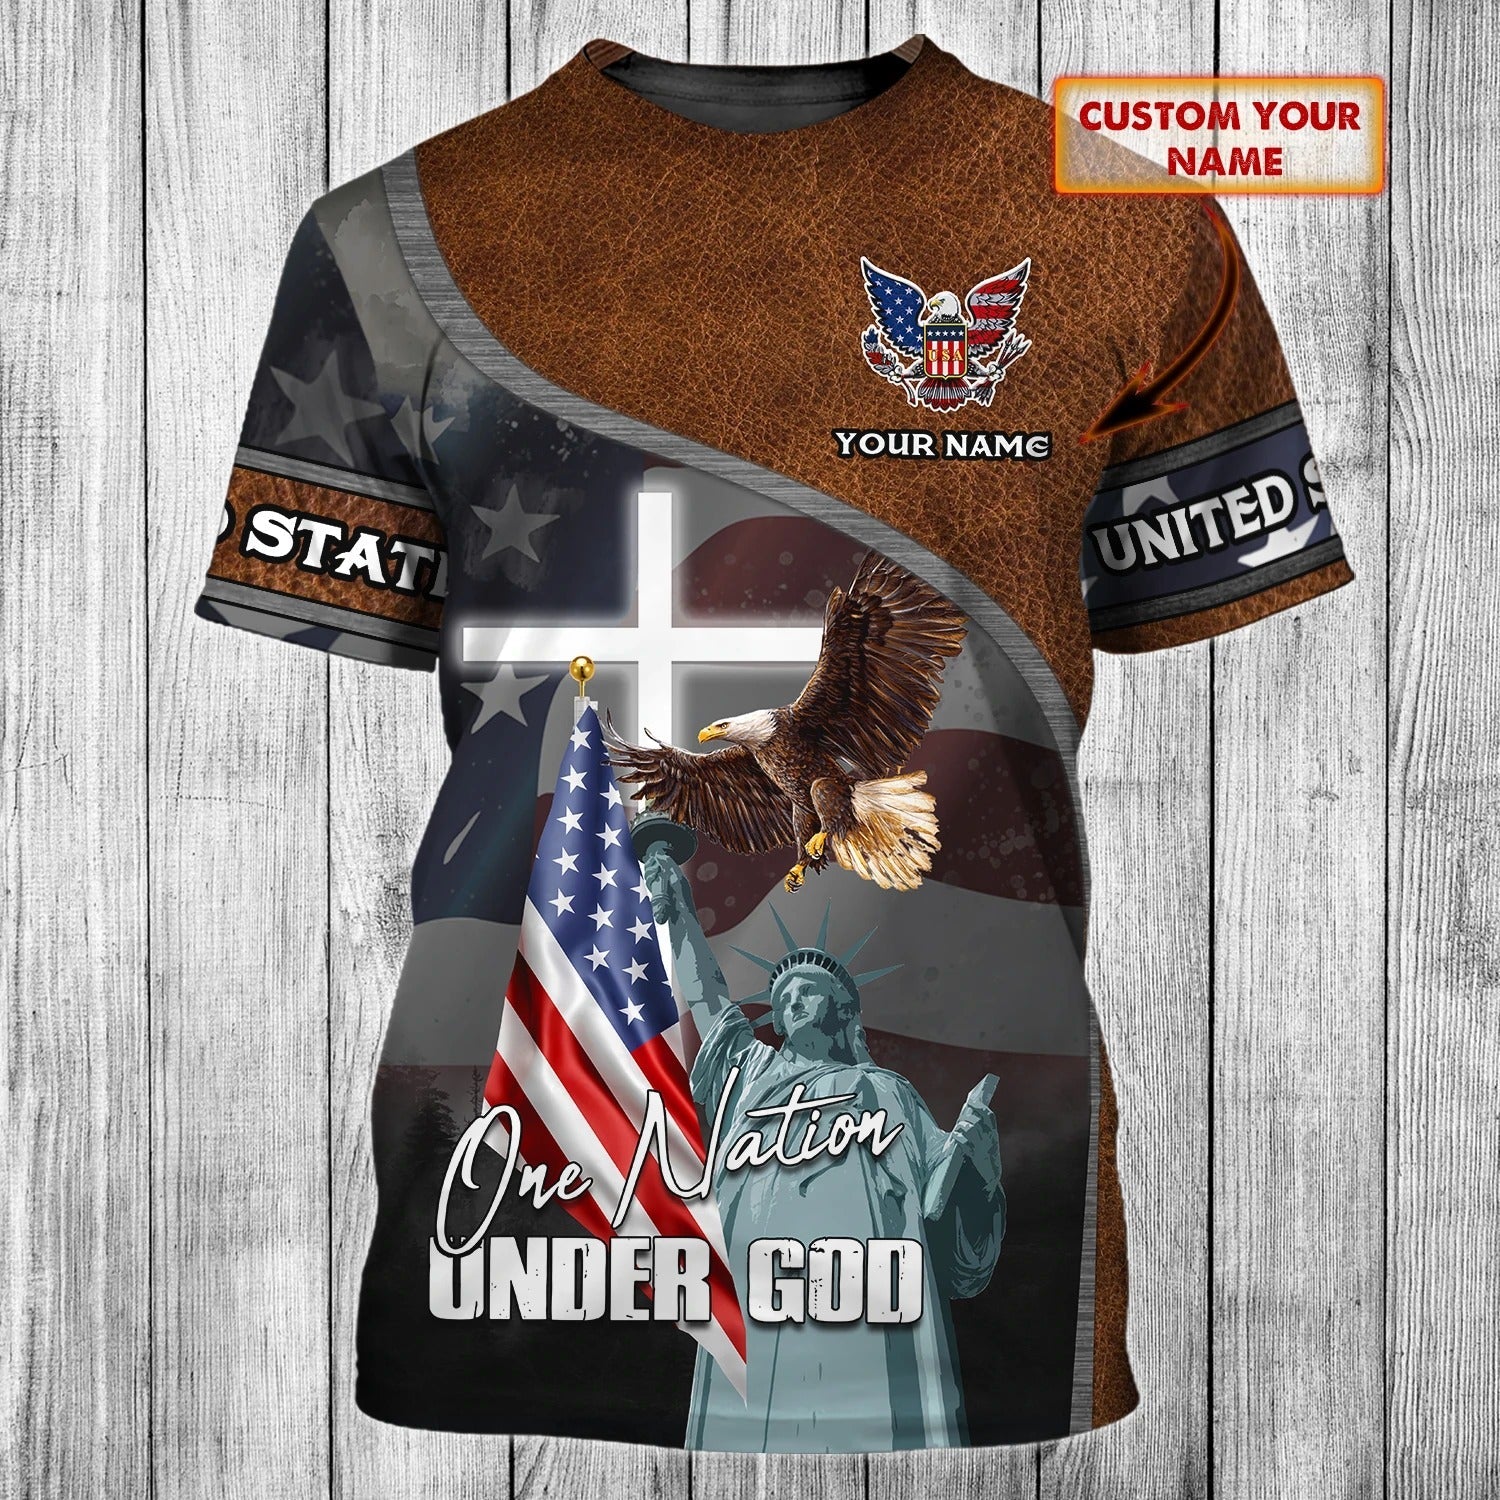 Personalized Jesus Eagle 3D Full Print Shirt 4Th Of July American Independence Day 3D Shirts With Name